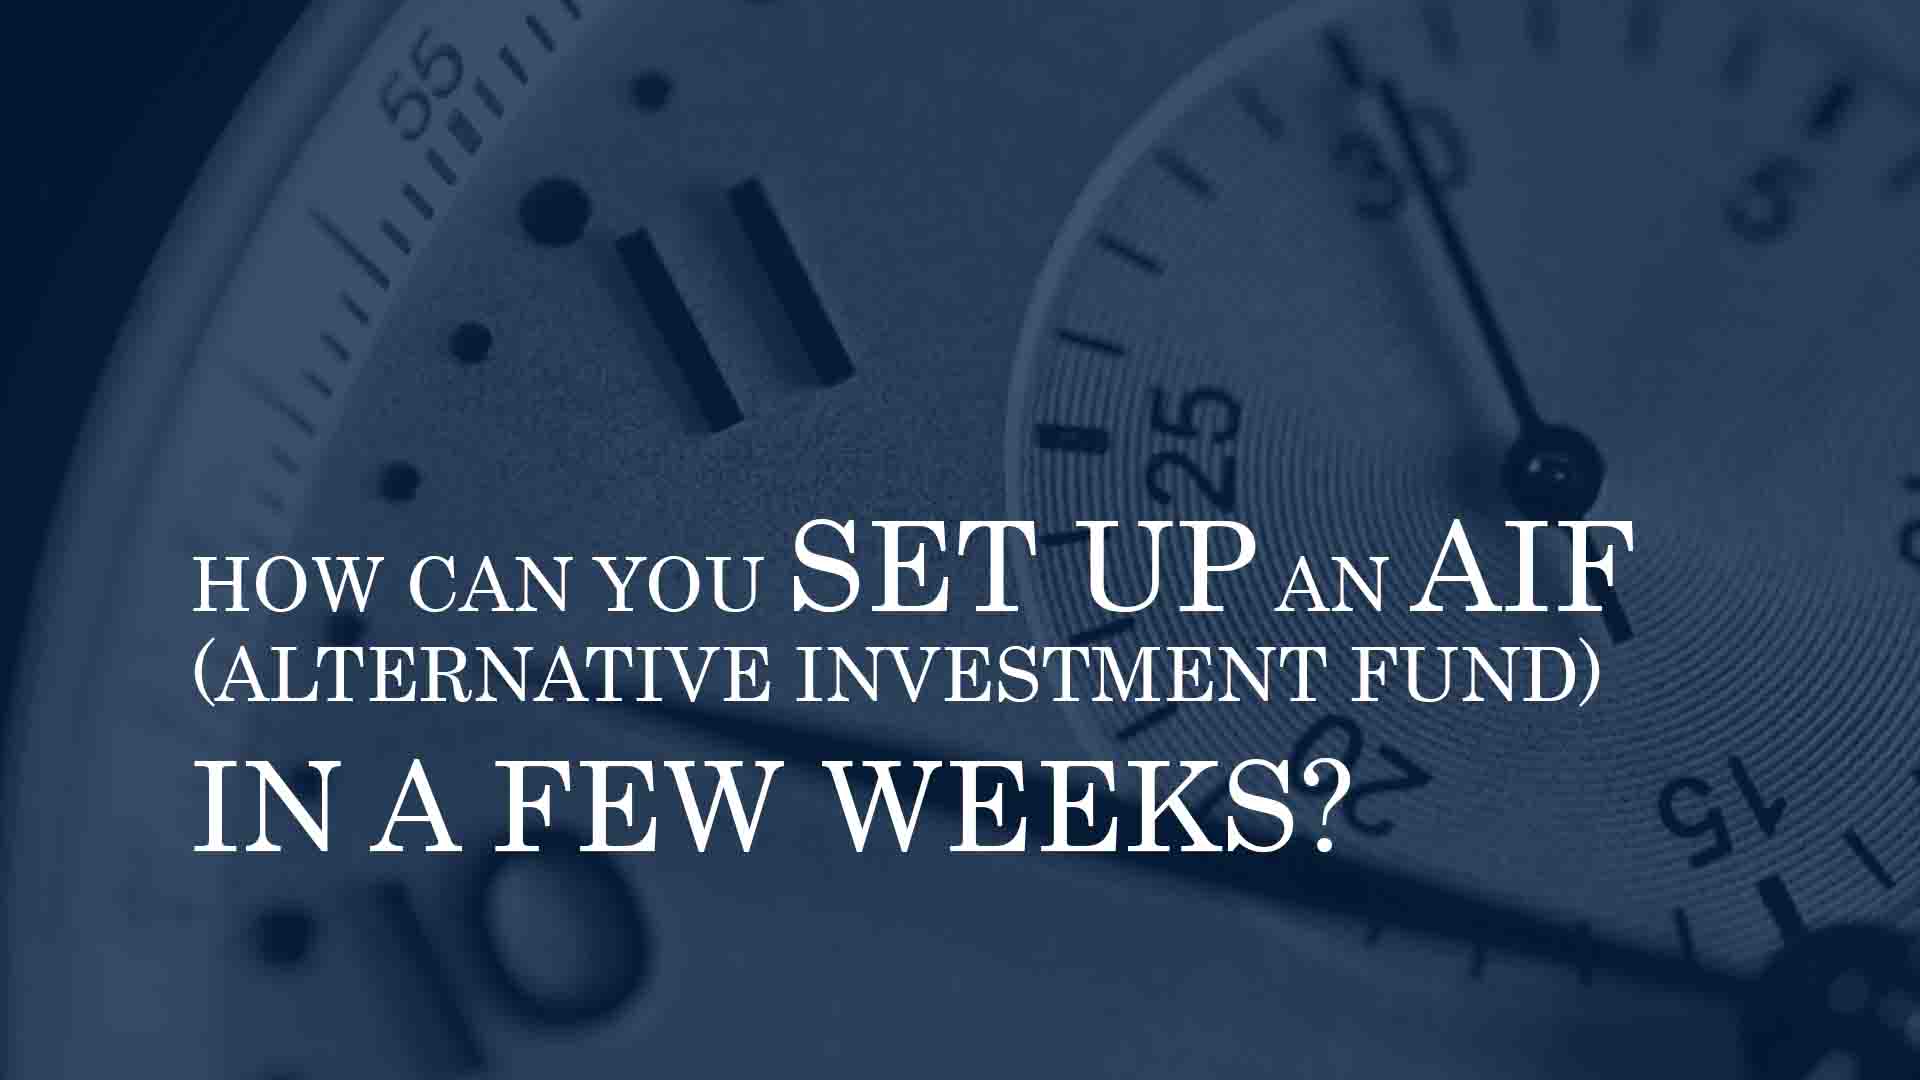 HOW CAN YOU SET UP AN ALTERNATIVE INVESTMENT FUND IN A FEW WEEKS? Panasiuk & Partners